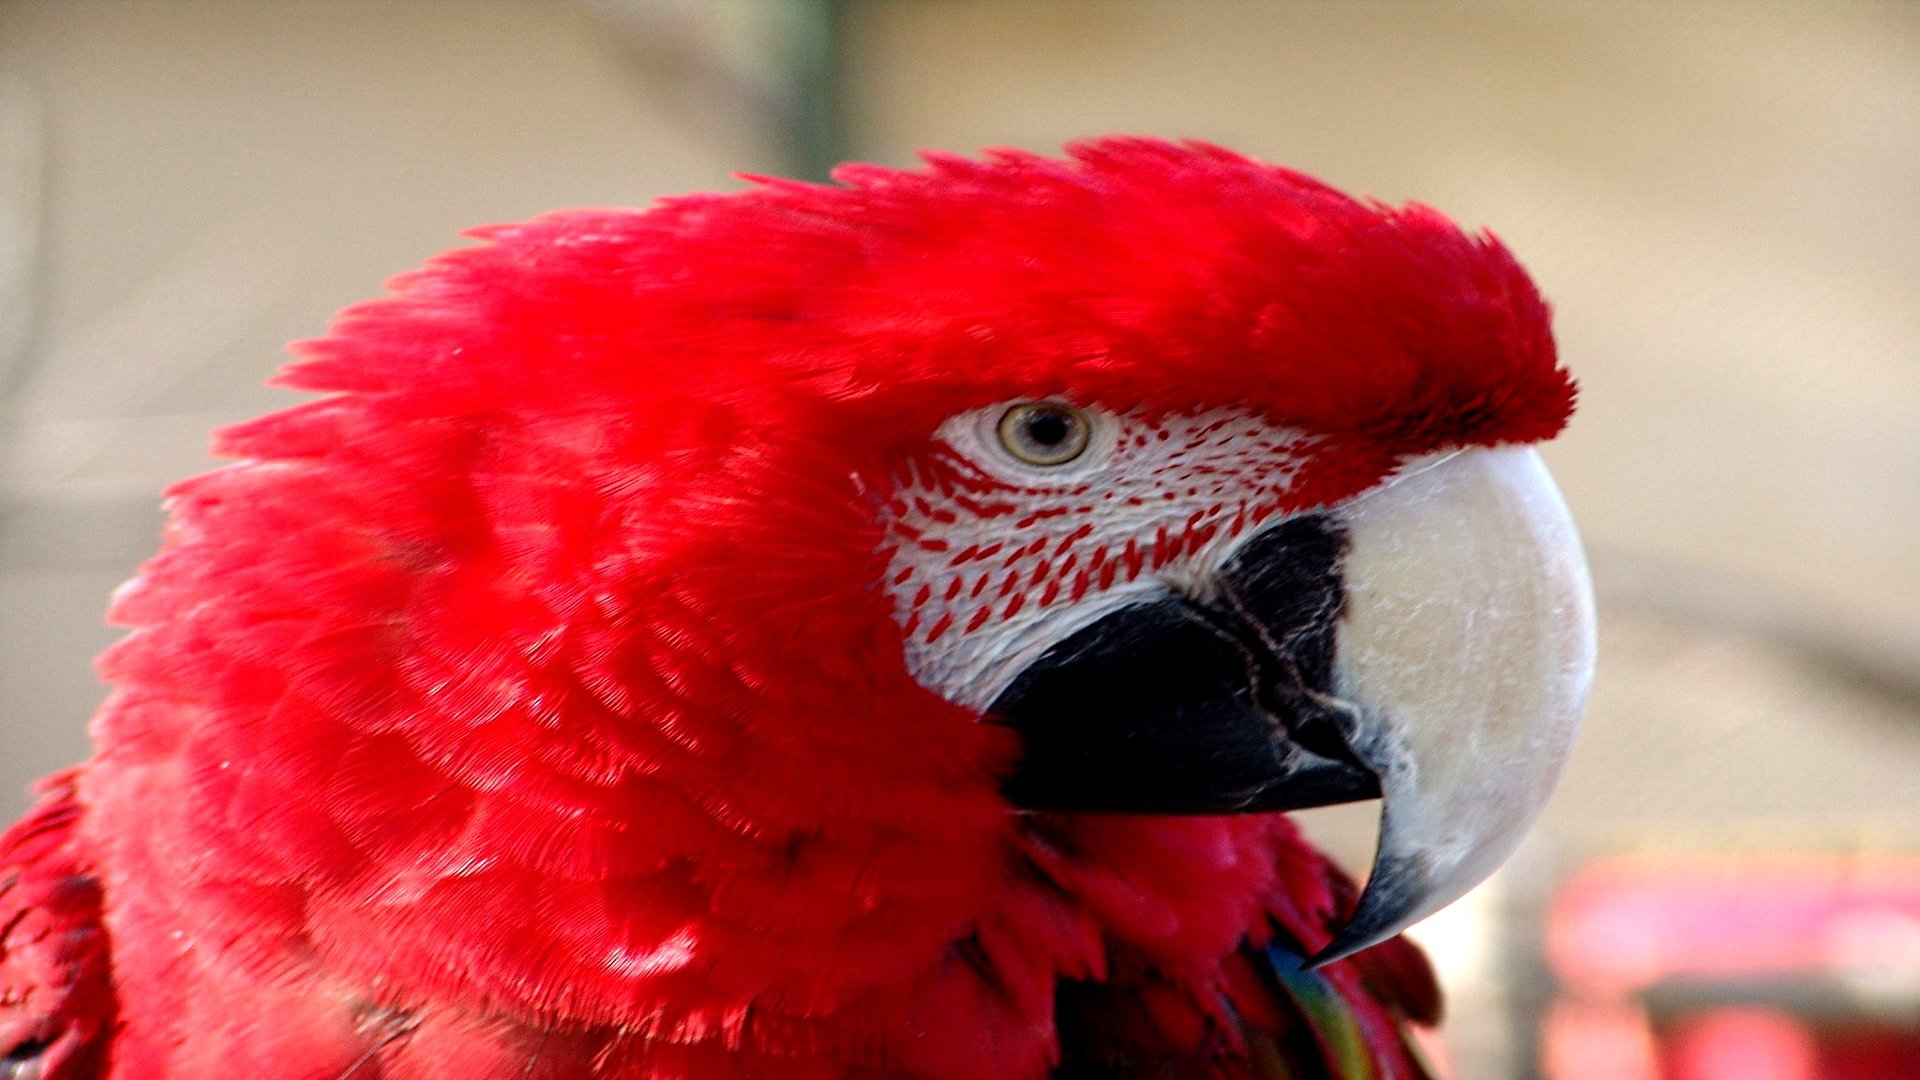 Download full hd 1080p Macaw desktop background ID:46357 for free